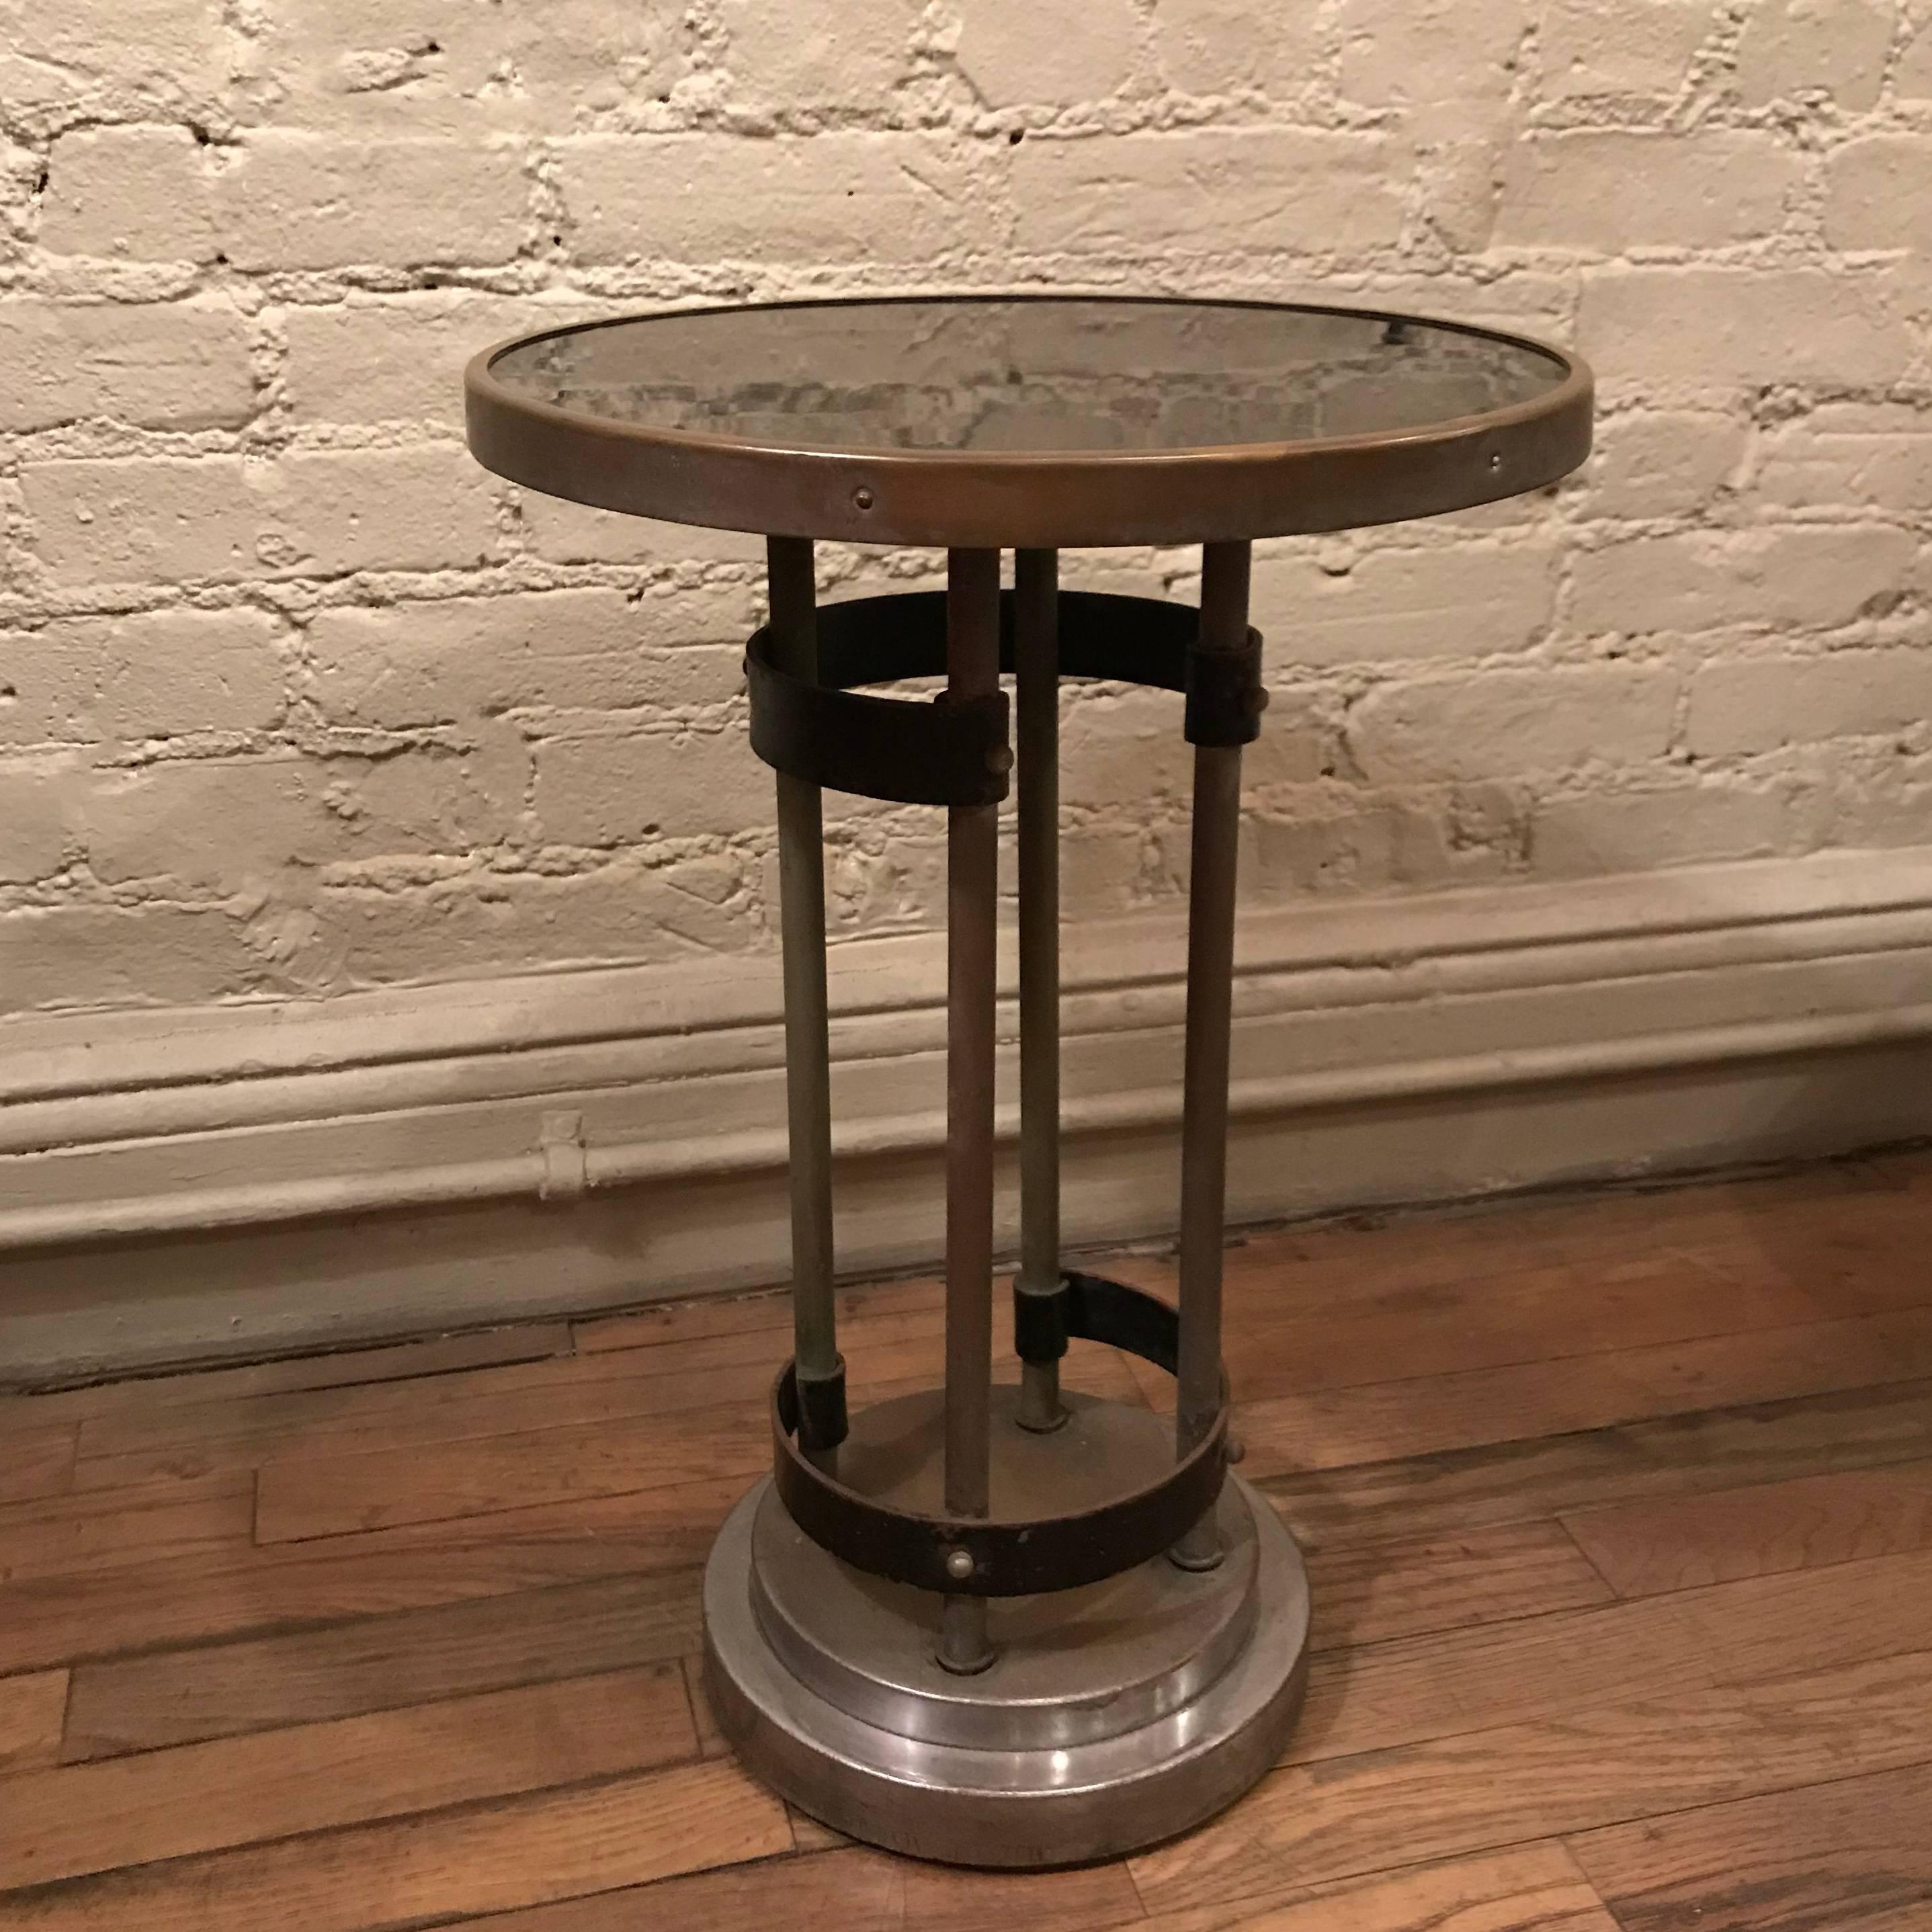 Art Deco side table by Gilbert Rohde features a round laminate top with brass trim and chrome stepped base with brass stems and painted metal braces.